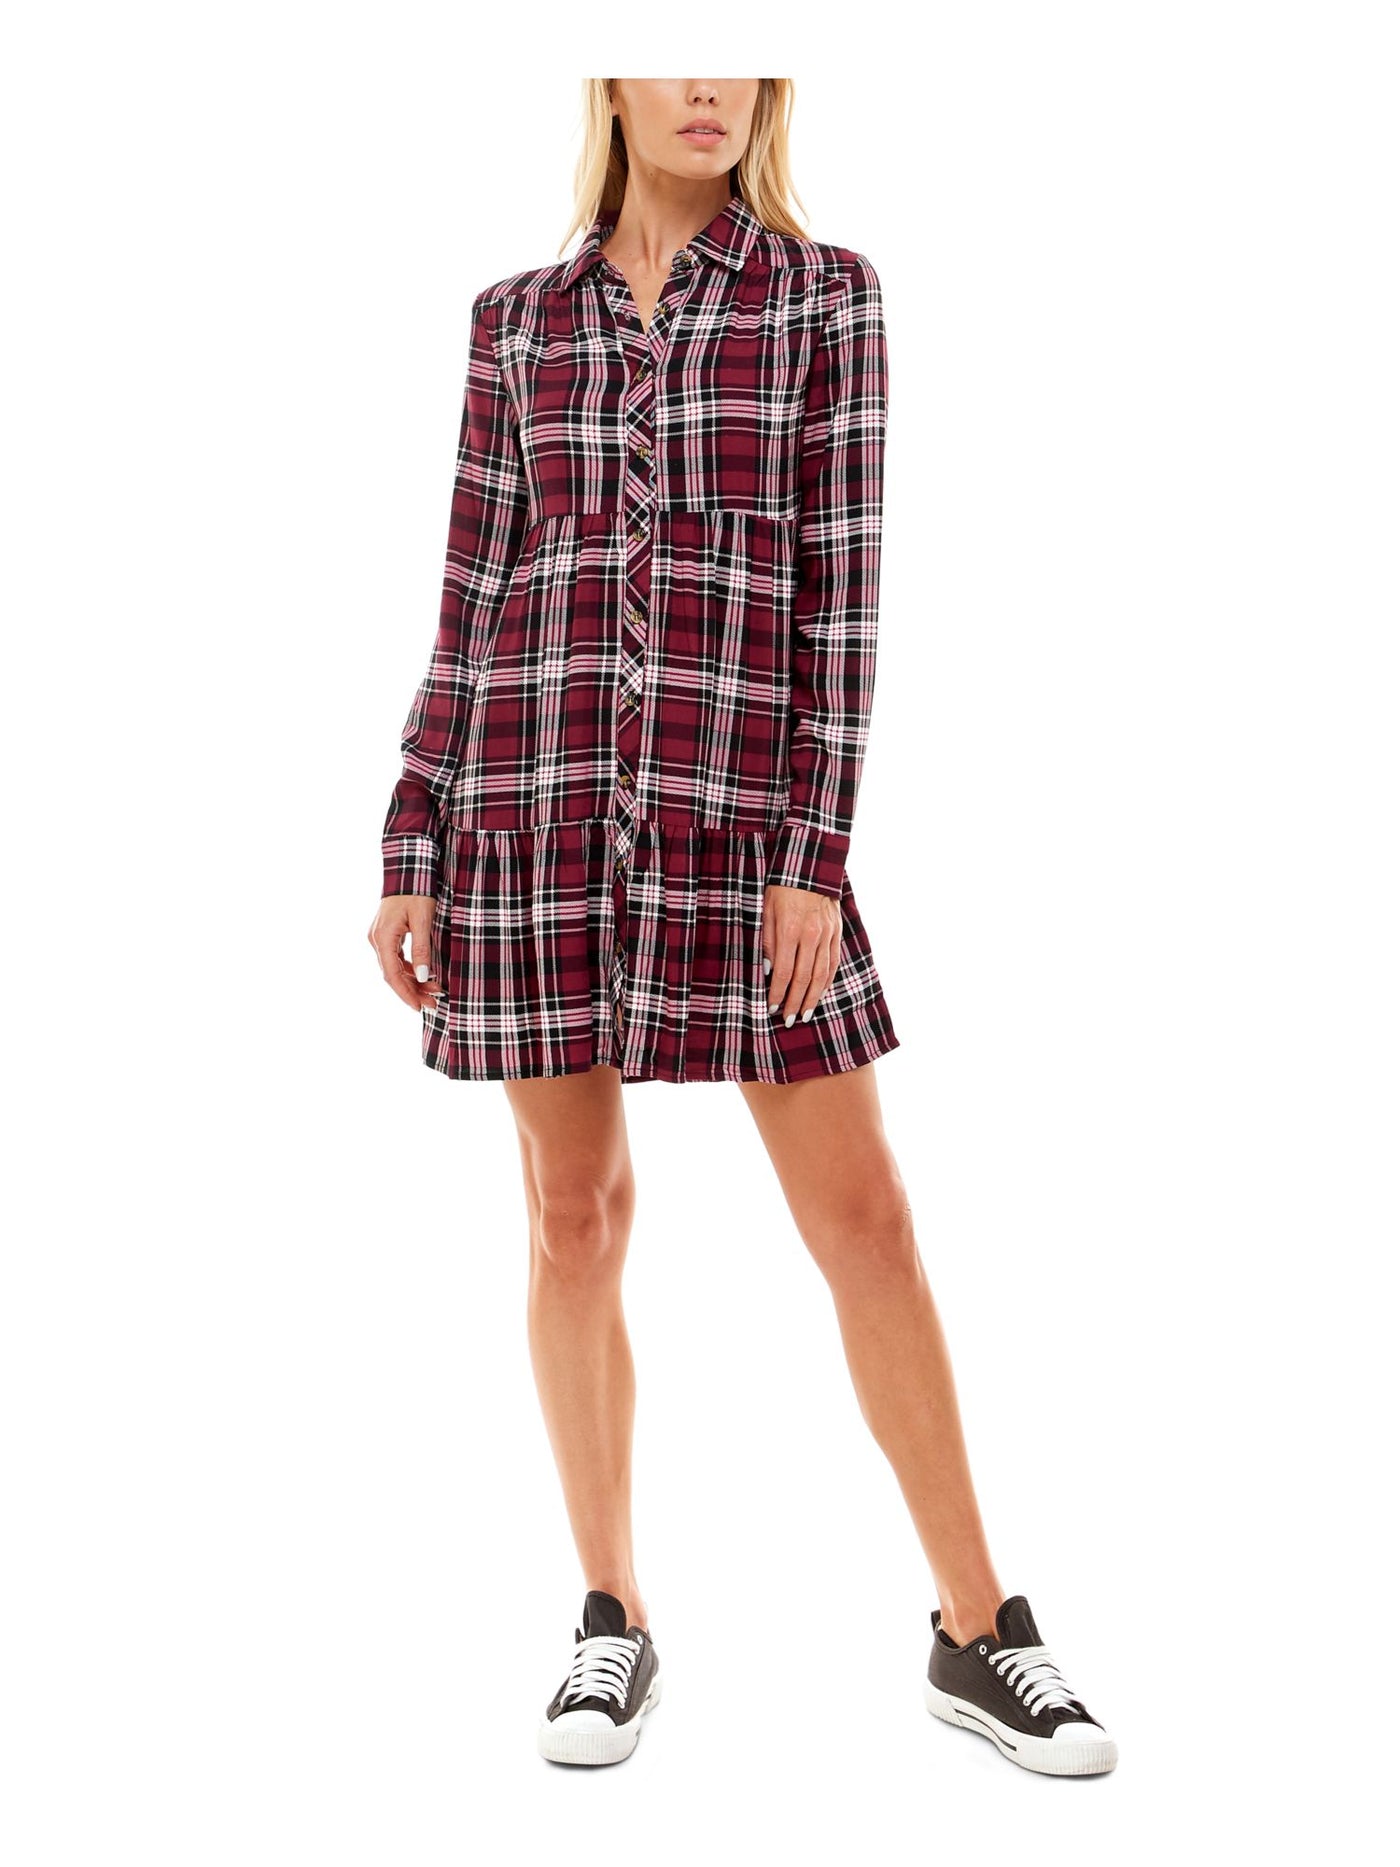 ULTRA FLIRT Womens Maroon Plaid Cuffed Sleeve Point Collar Above The Knee Wear To Work Fit + Flare Dress M